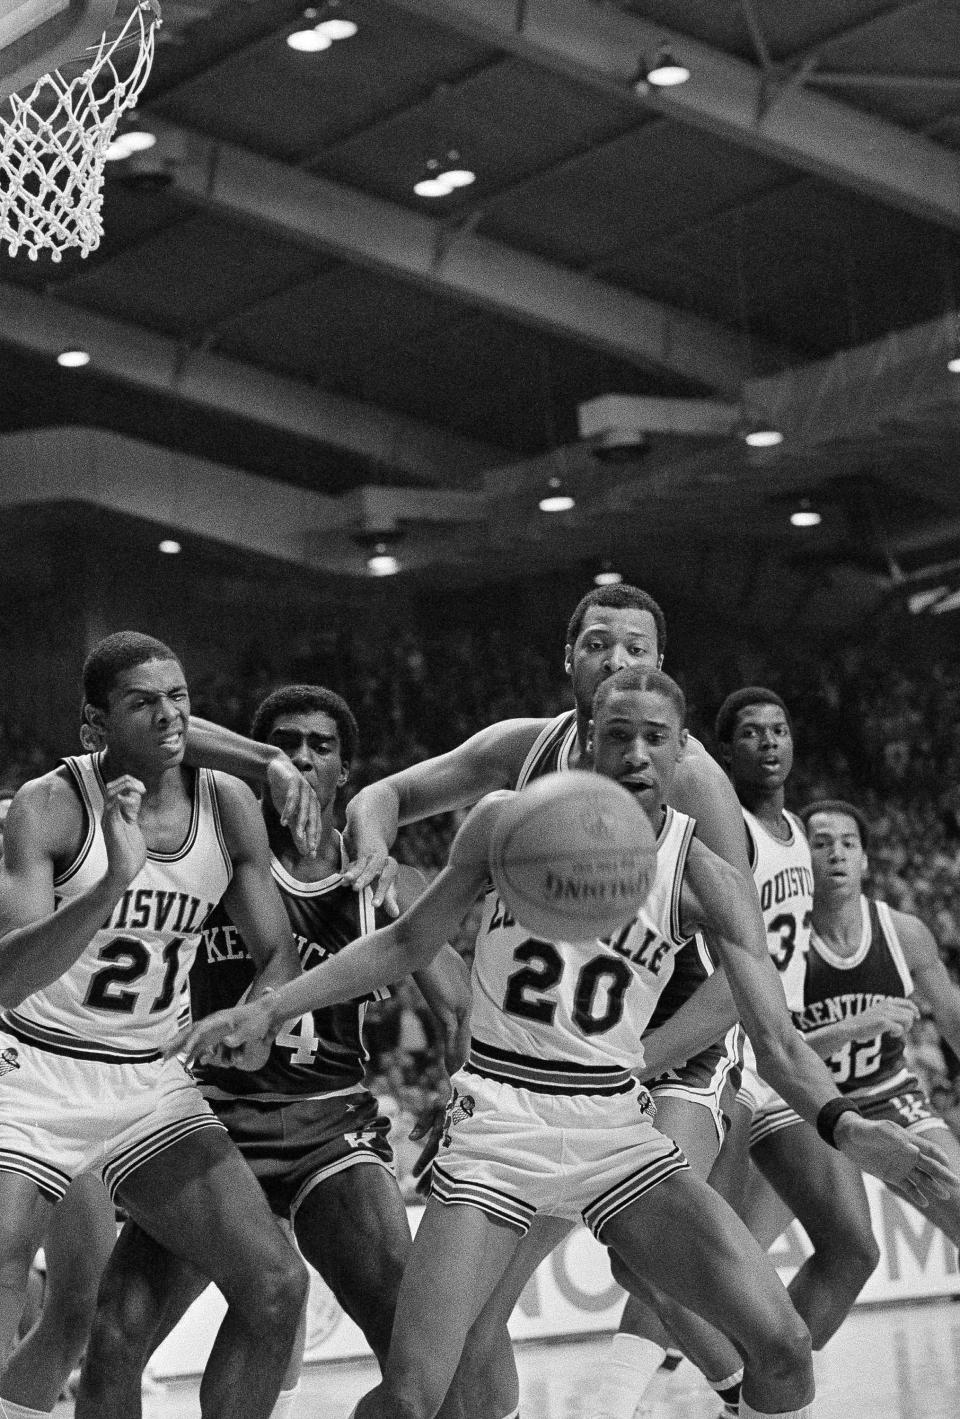 Louisville's Milt Wagner blocks out Kentucky's Melvin Turpin as they go for a free ball in the first half of the NCAA Mideast Regional Championship game at the Stokely Athletics Center in Knoxville, Tenn., on March 26, 1983. 